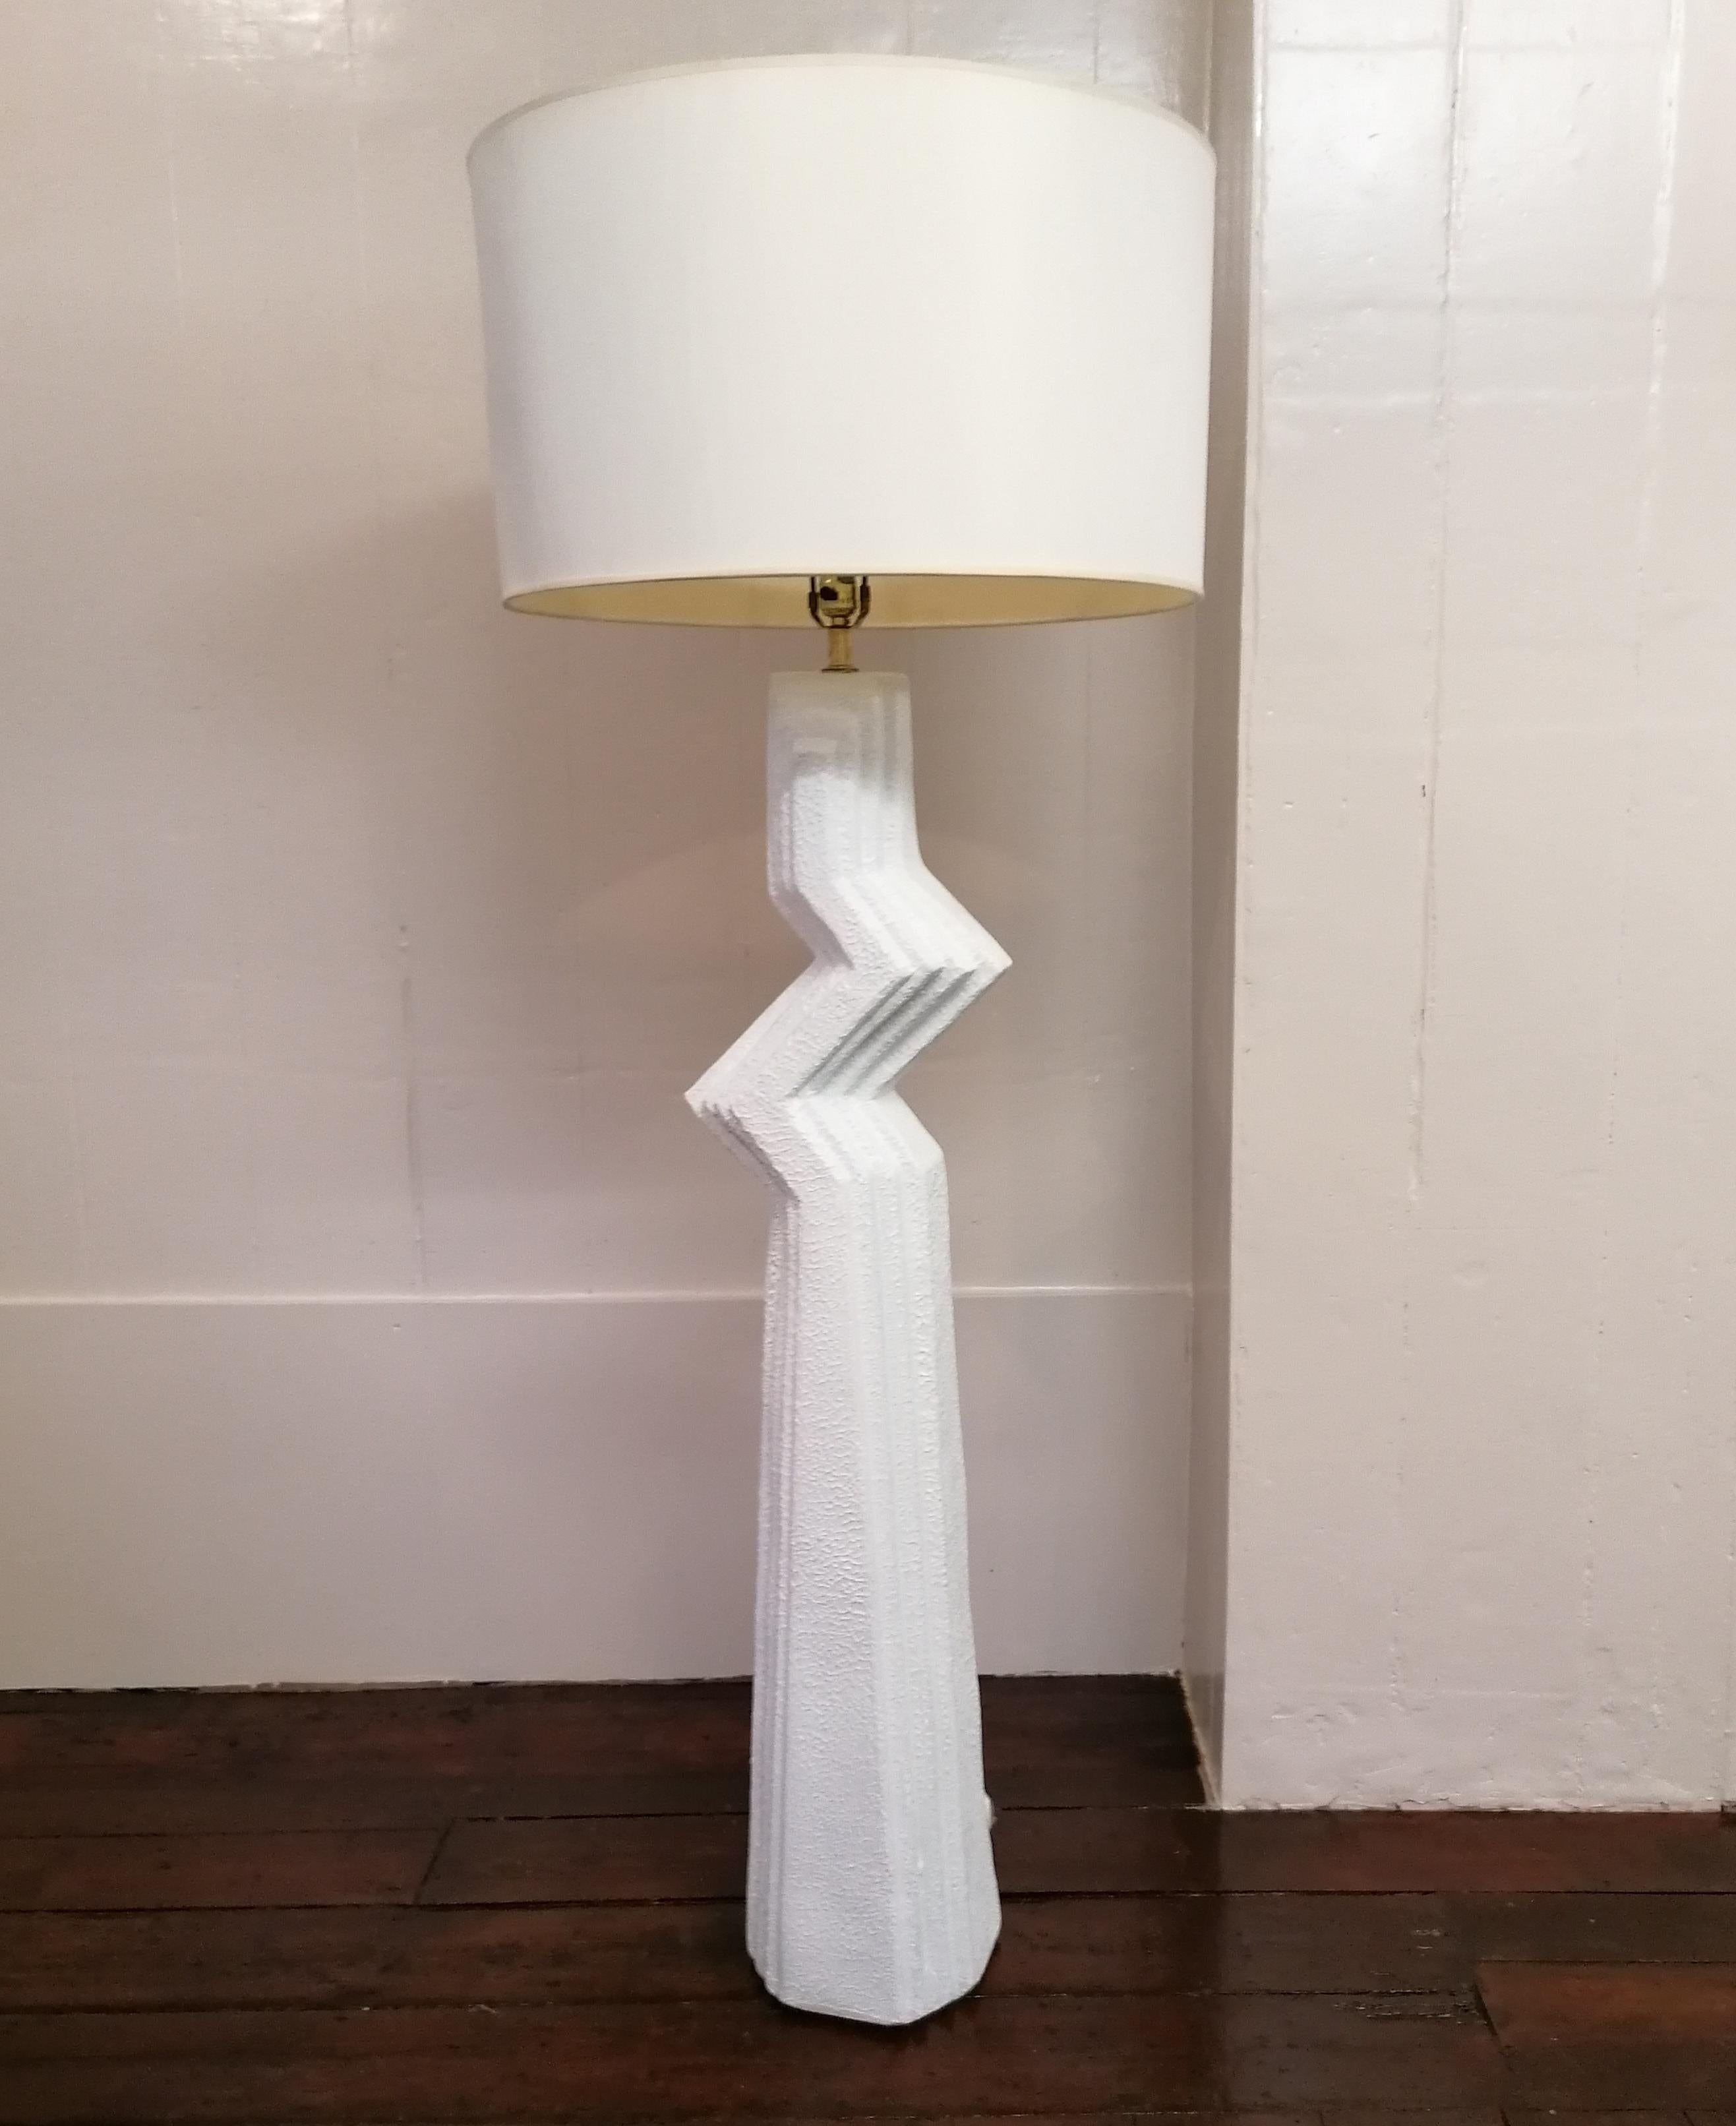 Rare large postmodern American textured plaster zig zag floor lamp, complete with large drum shade. Hard to find these nowadays.
Newly rewired with braided cord. Shade has a few marks and dings: useable but you may want to change it.

We also have a